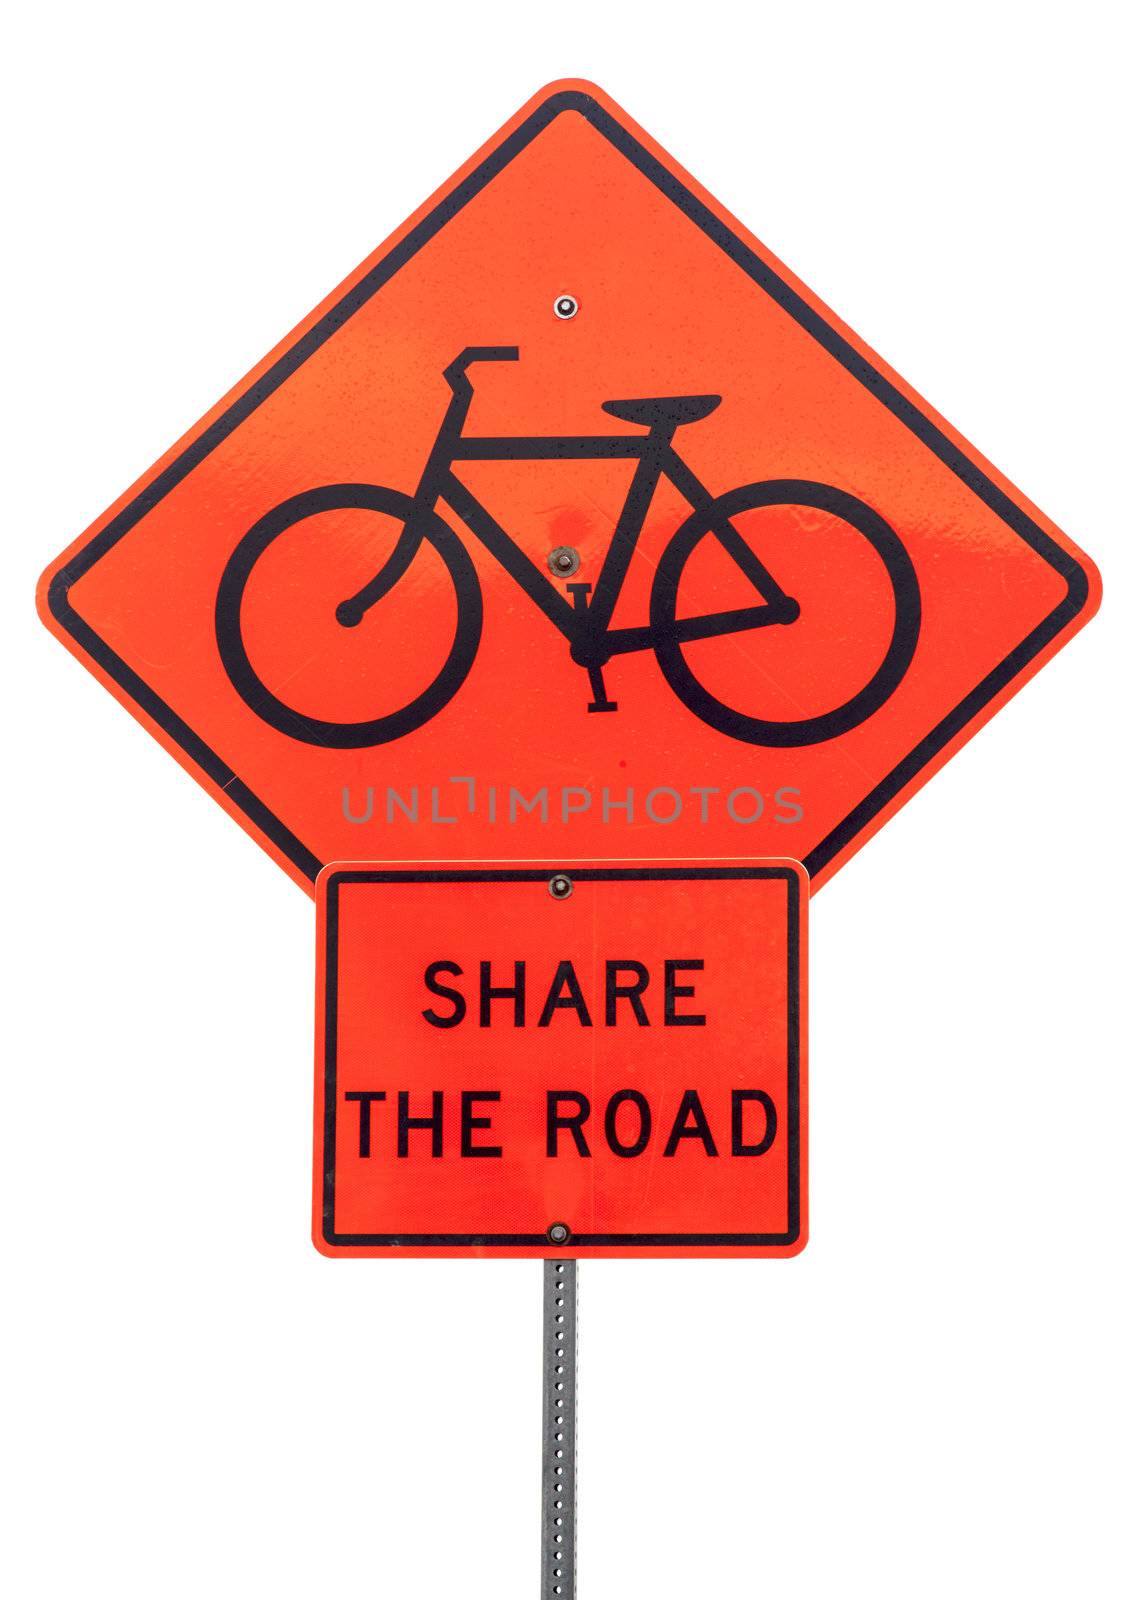 share the road sign by PixelsAway